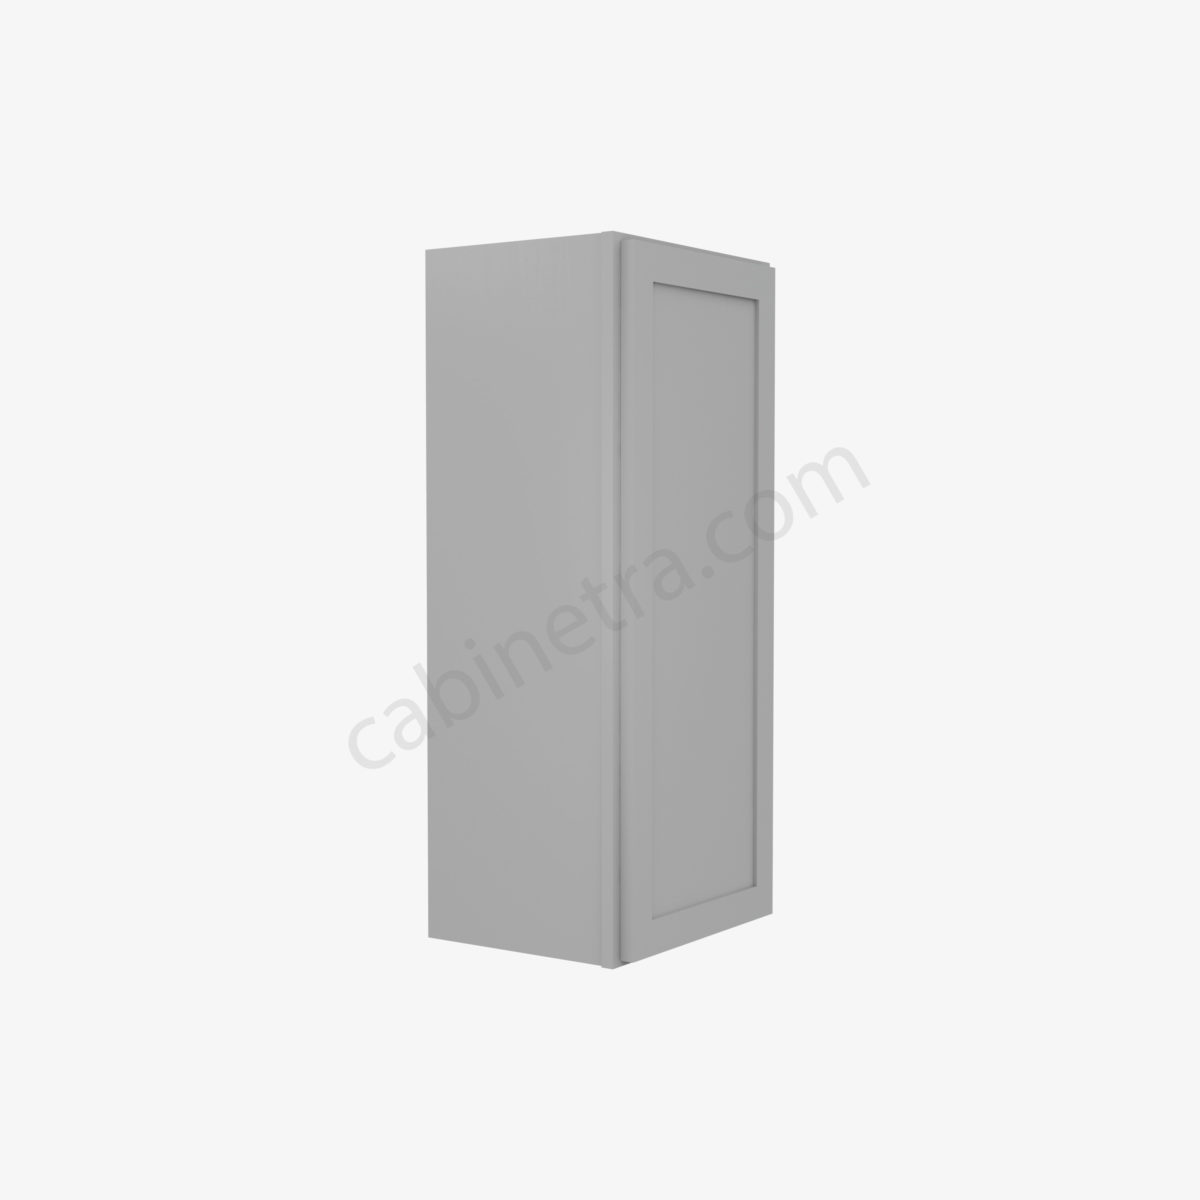 AB W1536 4 Forevermark Lait Gray Shaker Cabinetra scaled